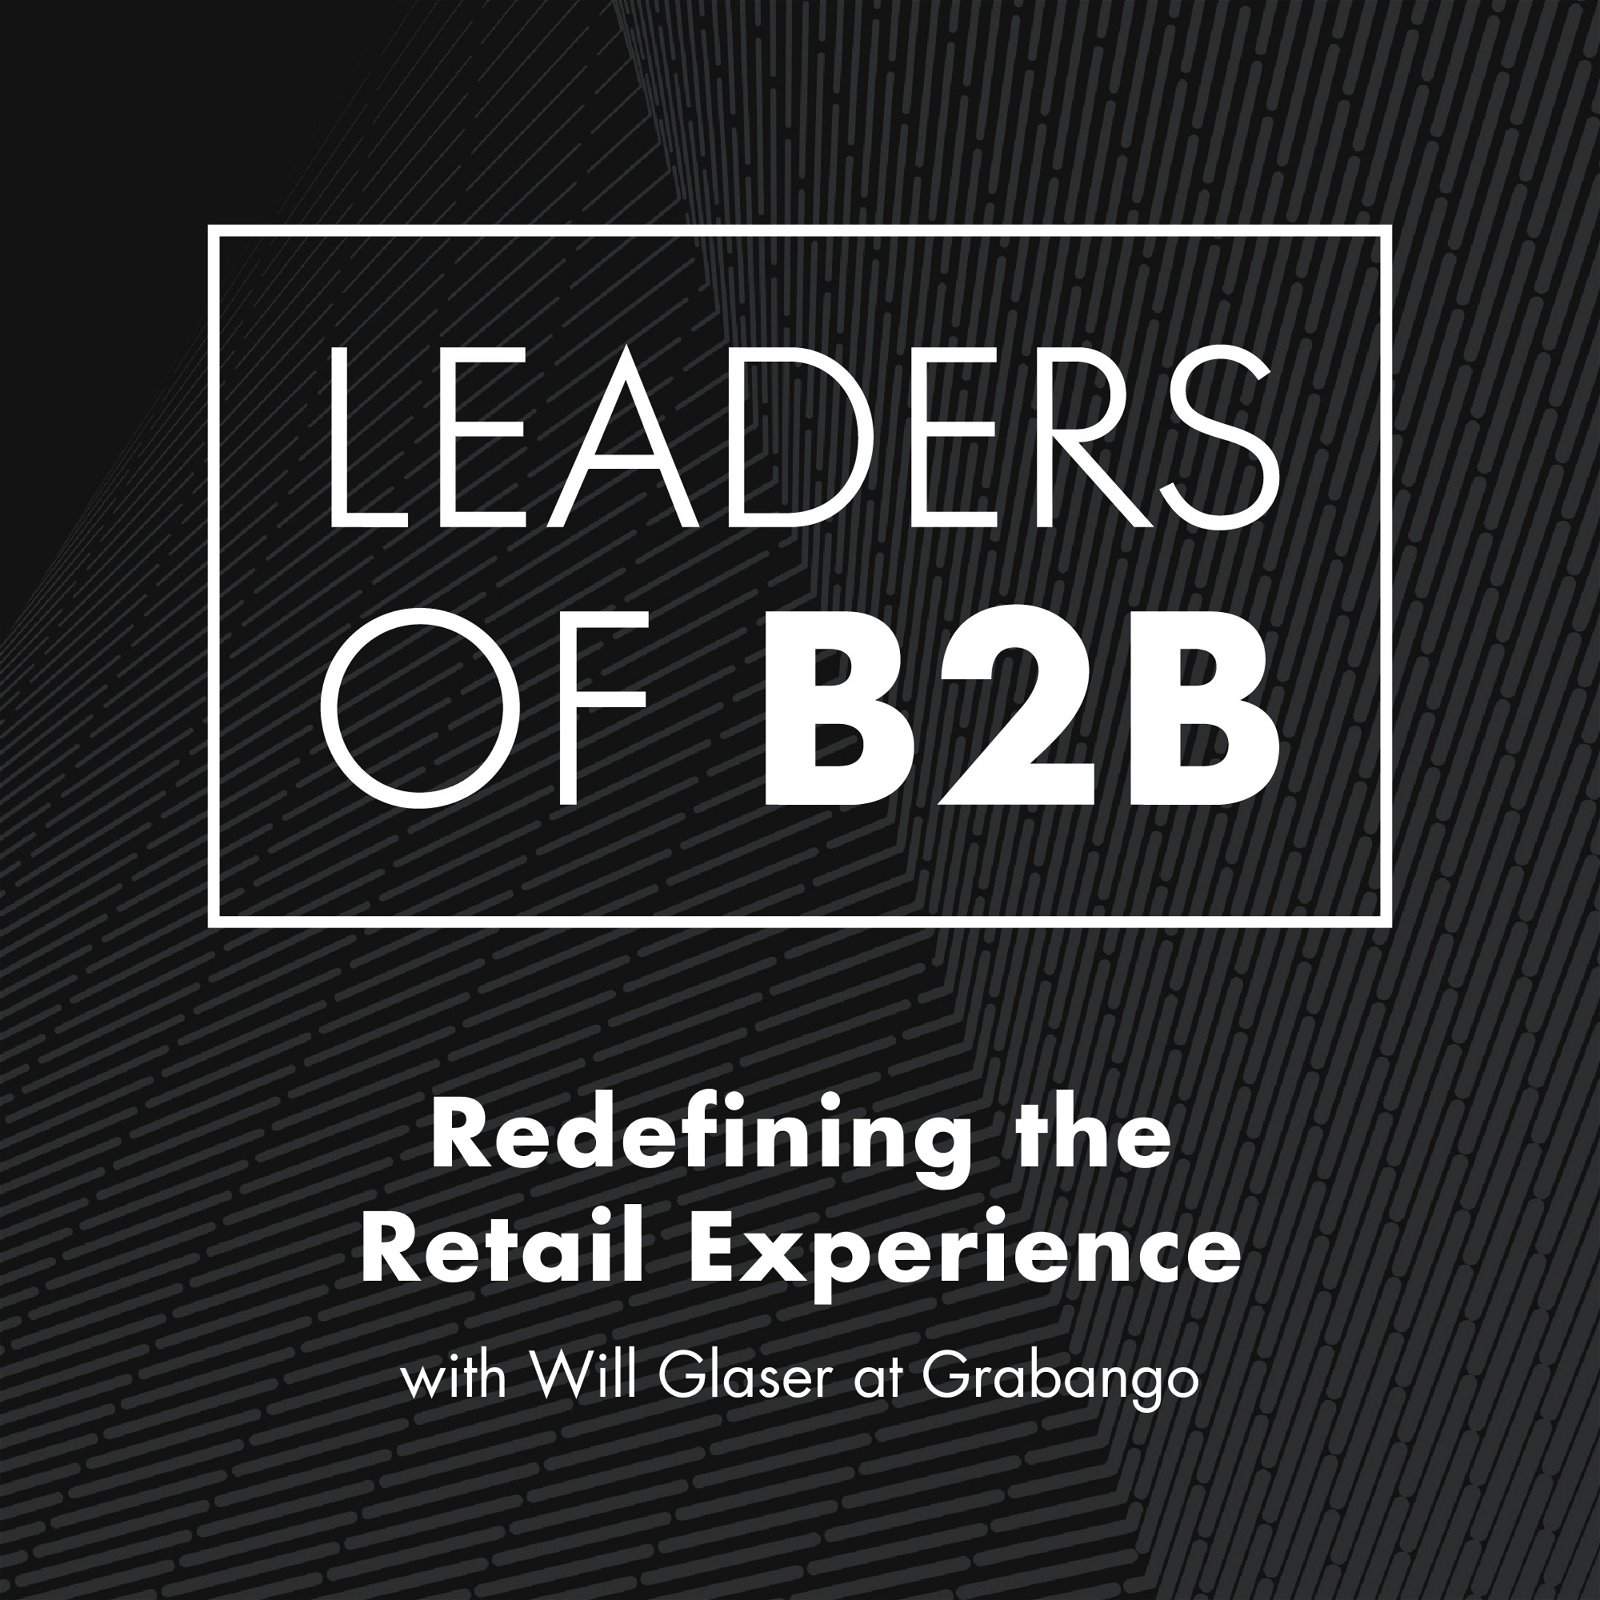 Redefining the Retail Experience with Will Glaser at Grabango